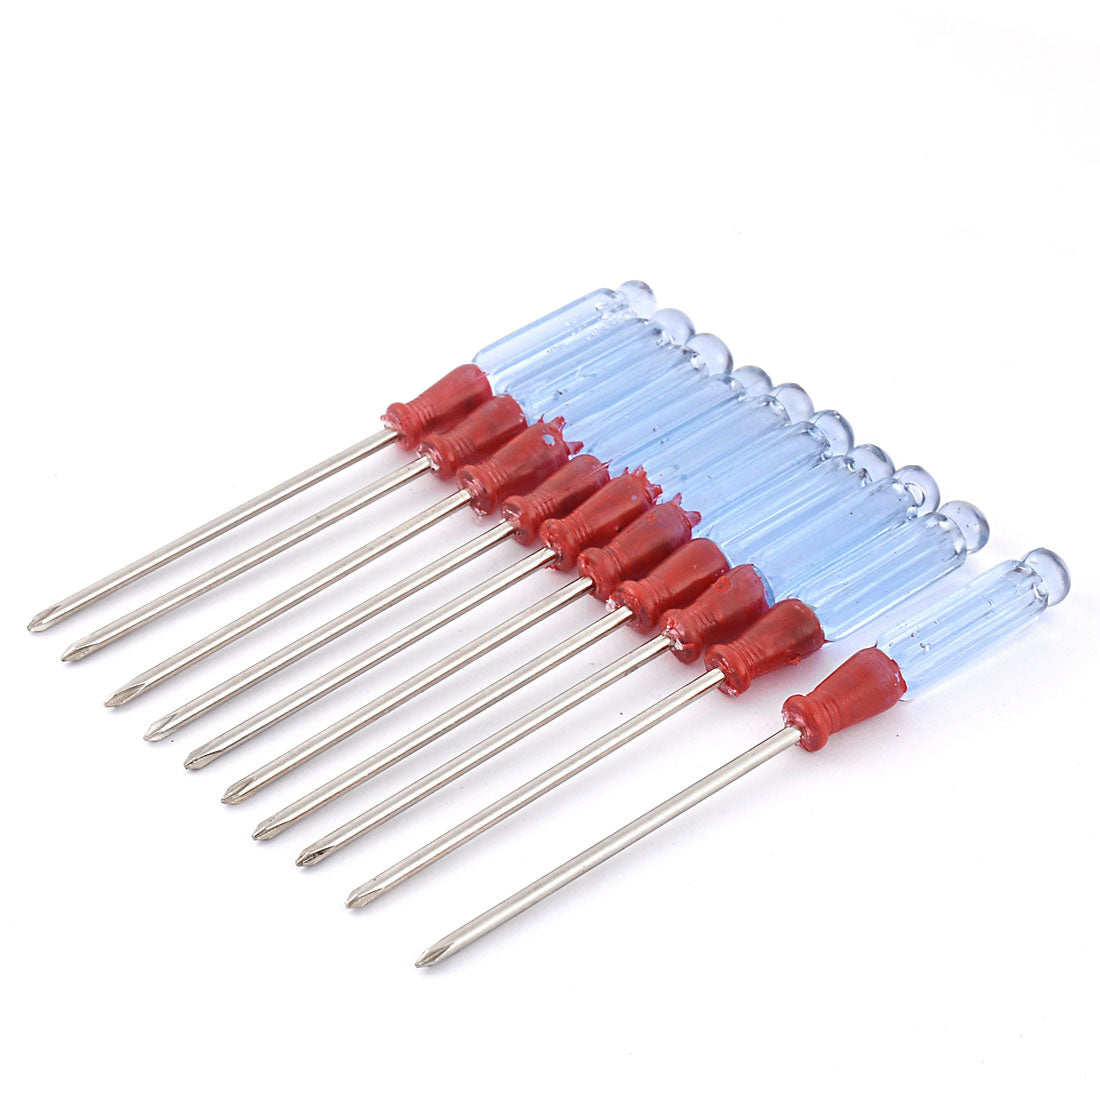 uxcell Uxcell Plastic Handle Cross Head Magnetic Phillips Screwdriver Tool 13cm Length 10pcs